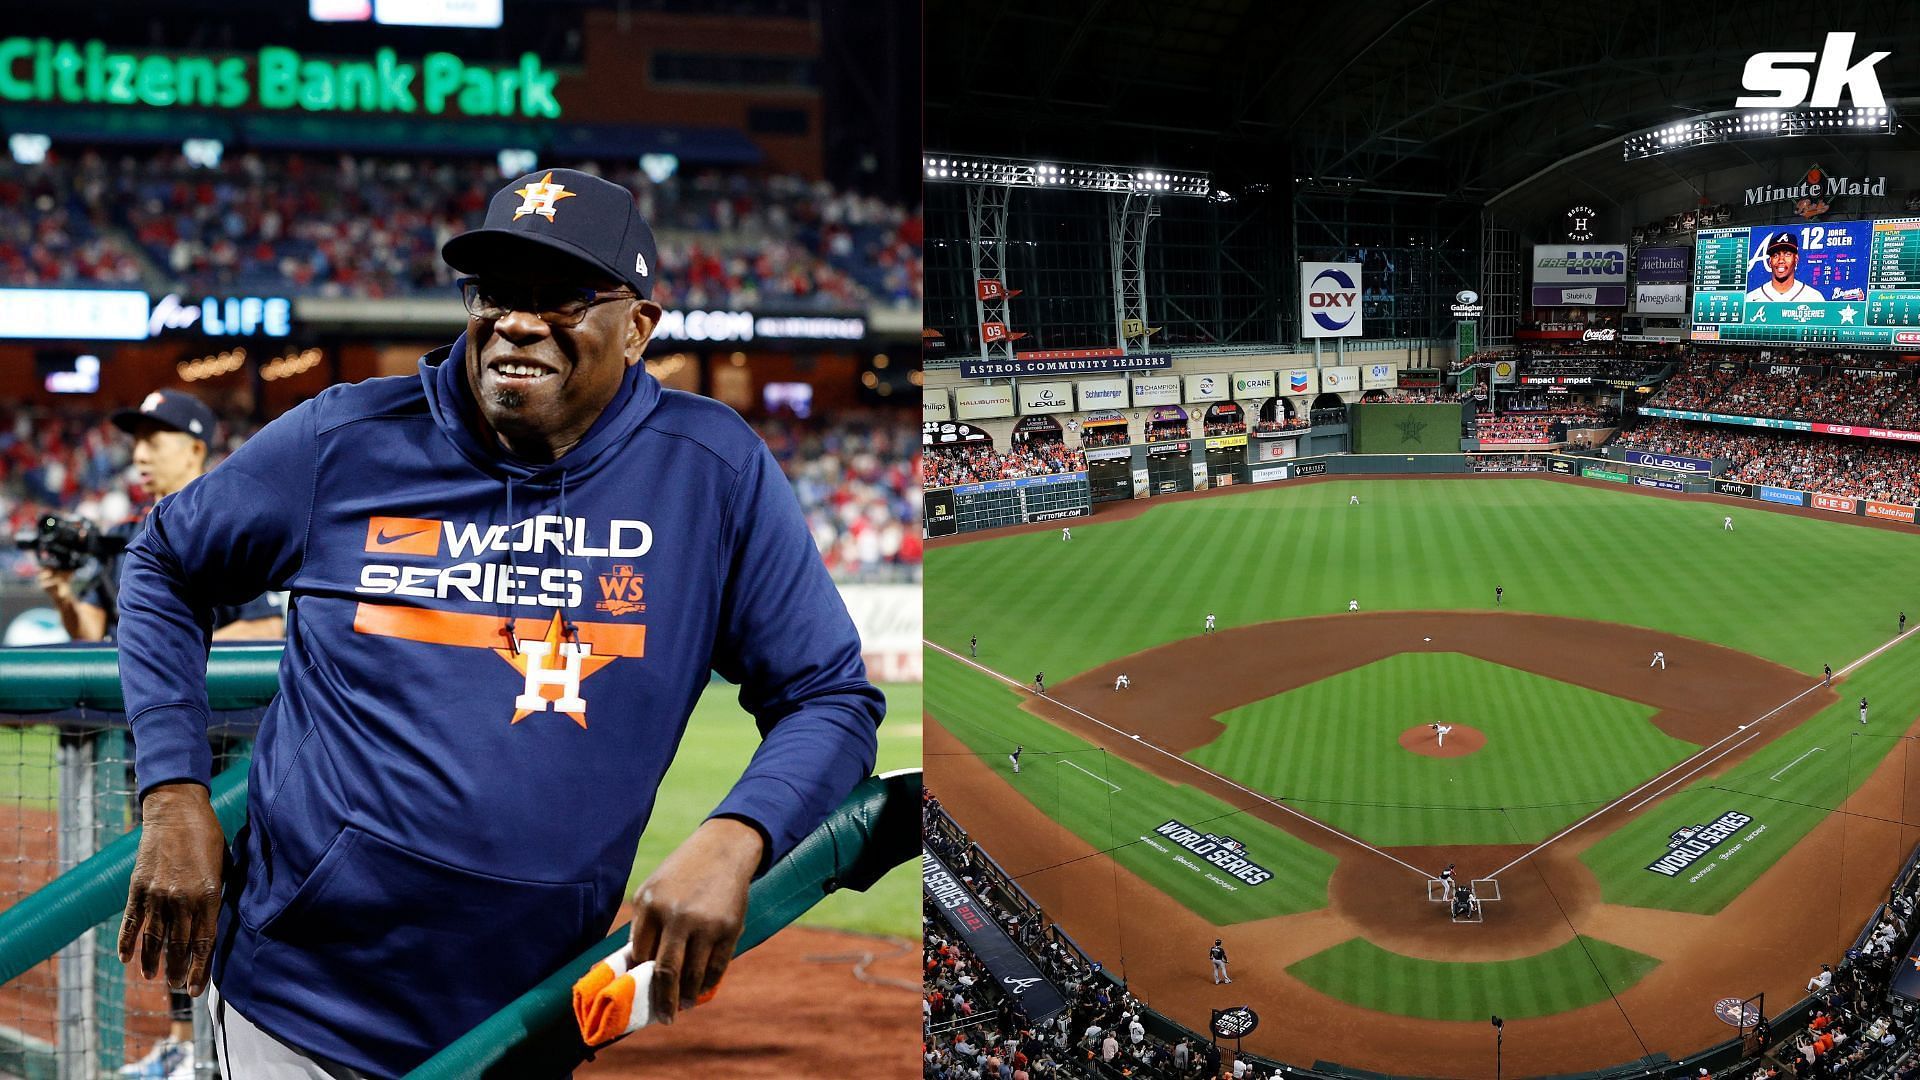 Minute Maid Park roof to be open for Game 2 of World Series